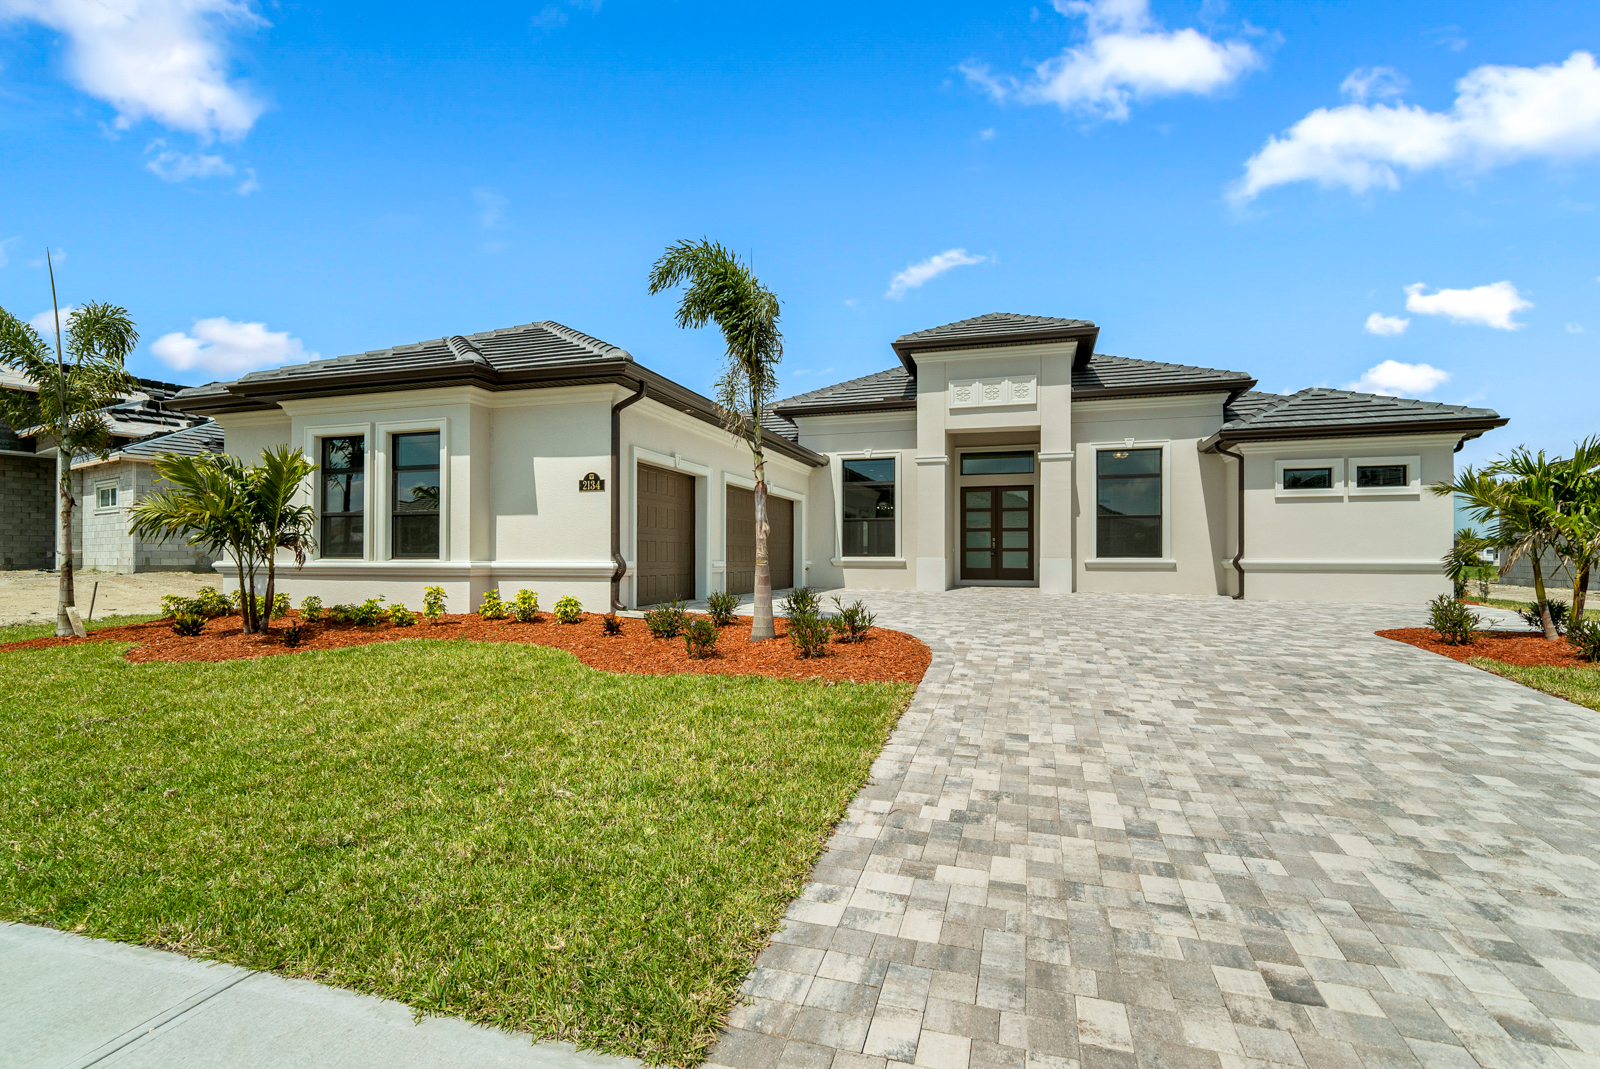 Finished Home in Viera FL Maui Floorplan by Stanley Homes in Melbourne